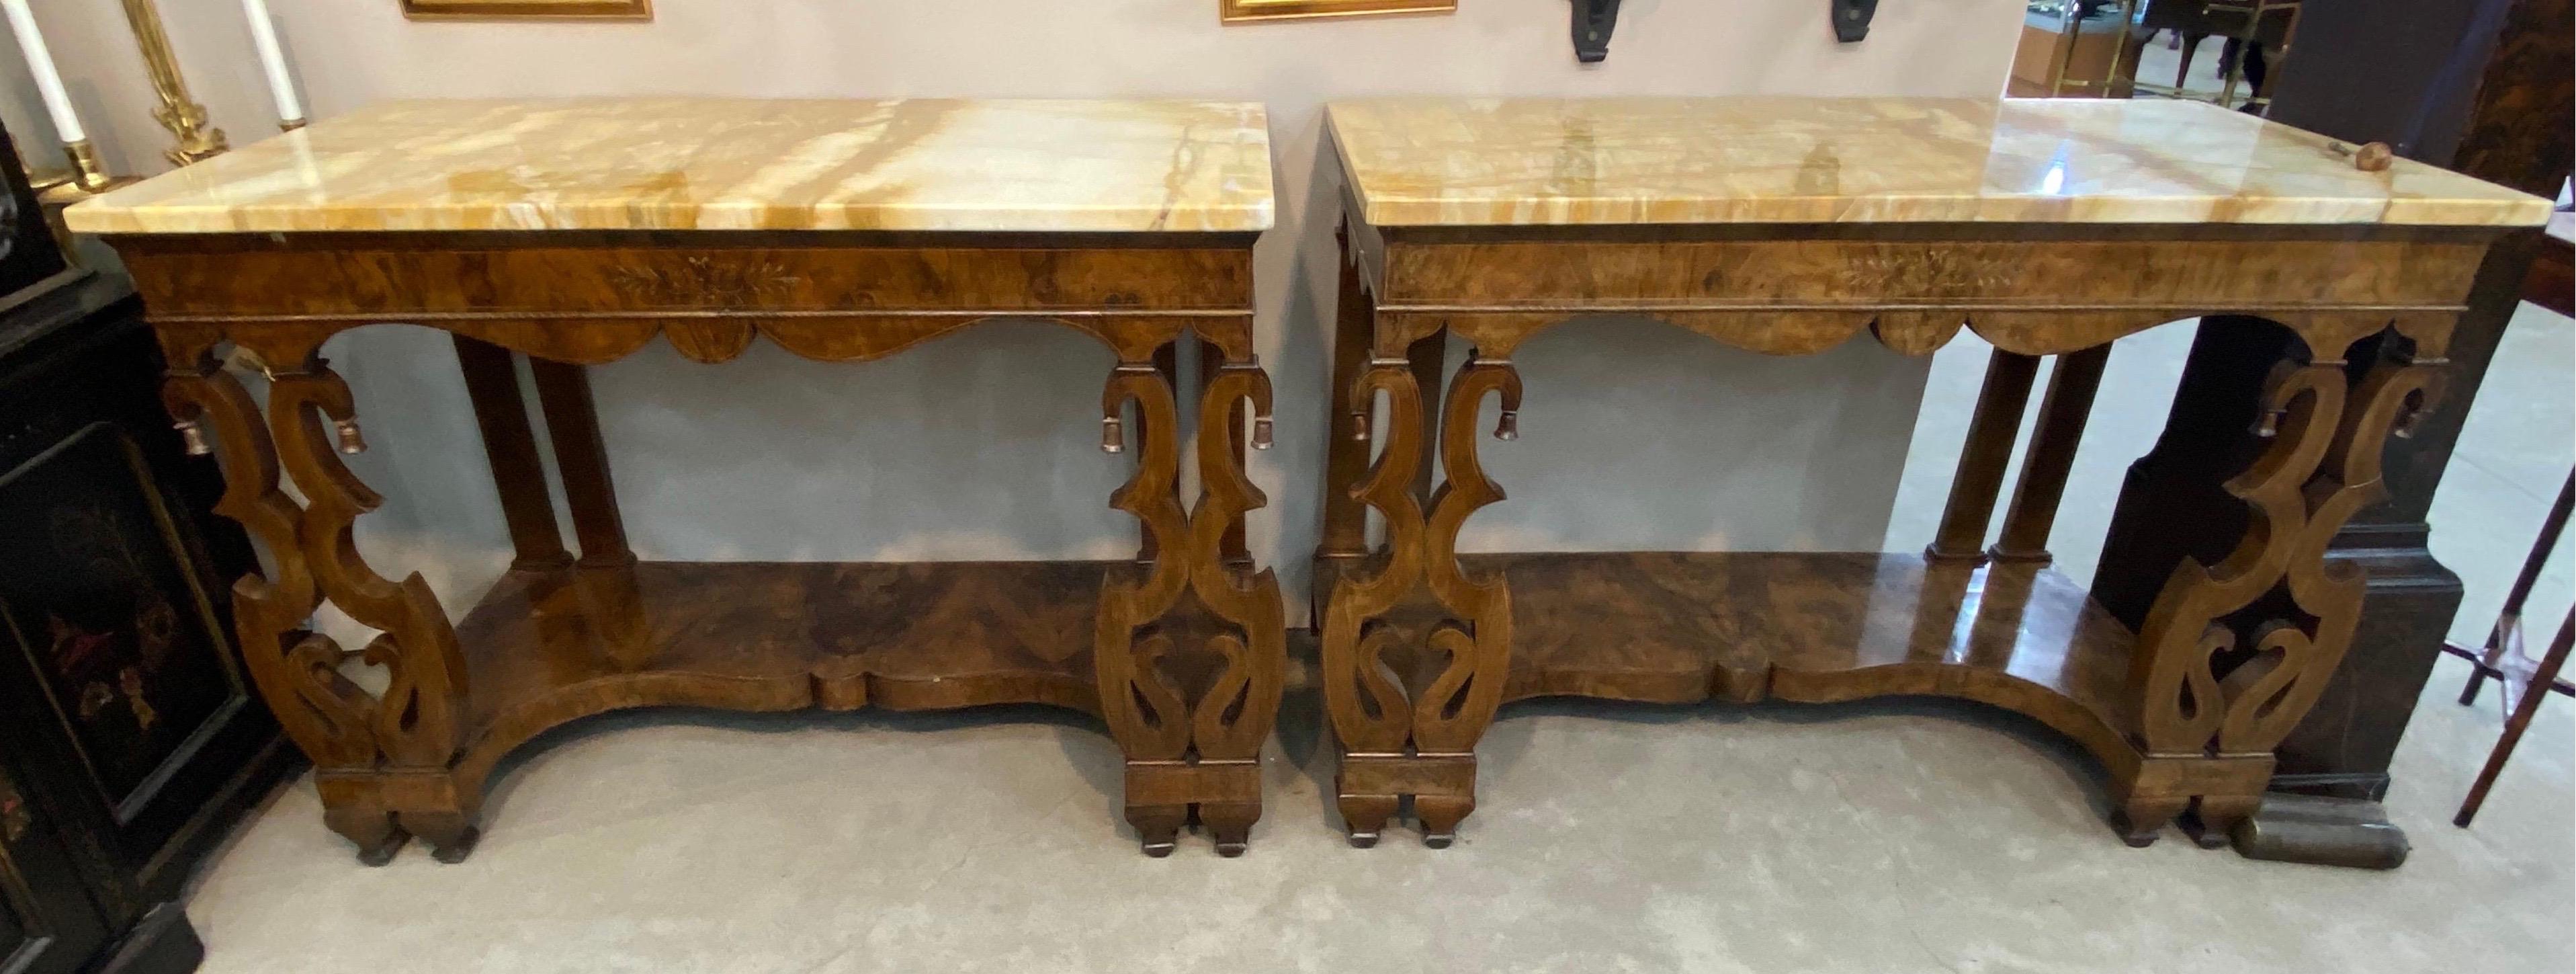 Incredible pair of 19th century Continental inlaid walnut consoles with yellow onyx tops. Northern Italian or Austrian mid 19th century. Incredible scale and quality